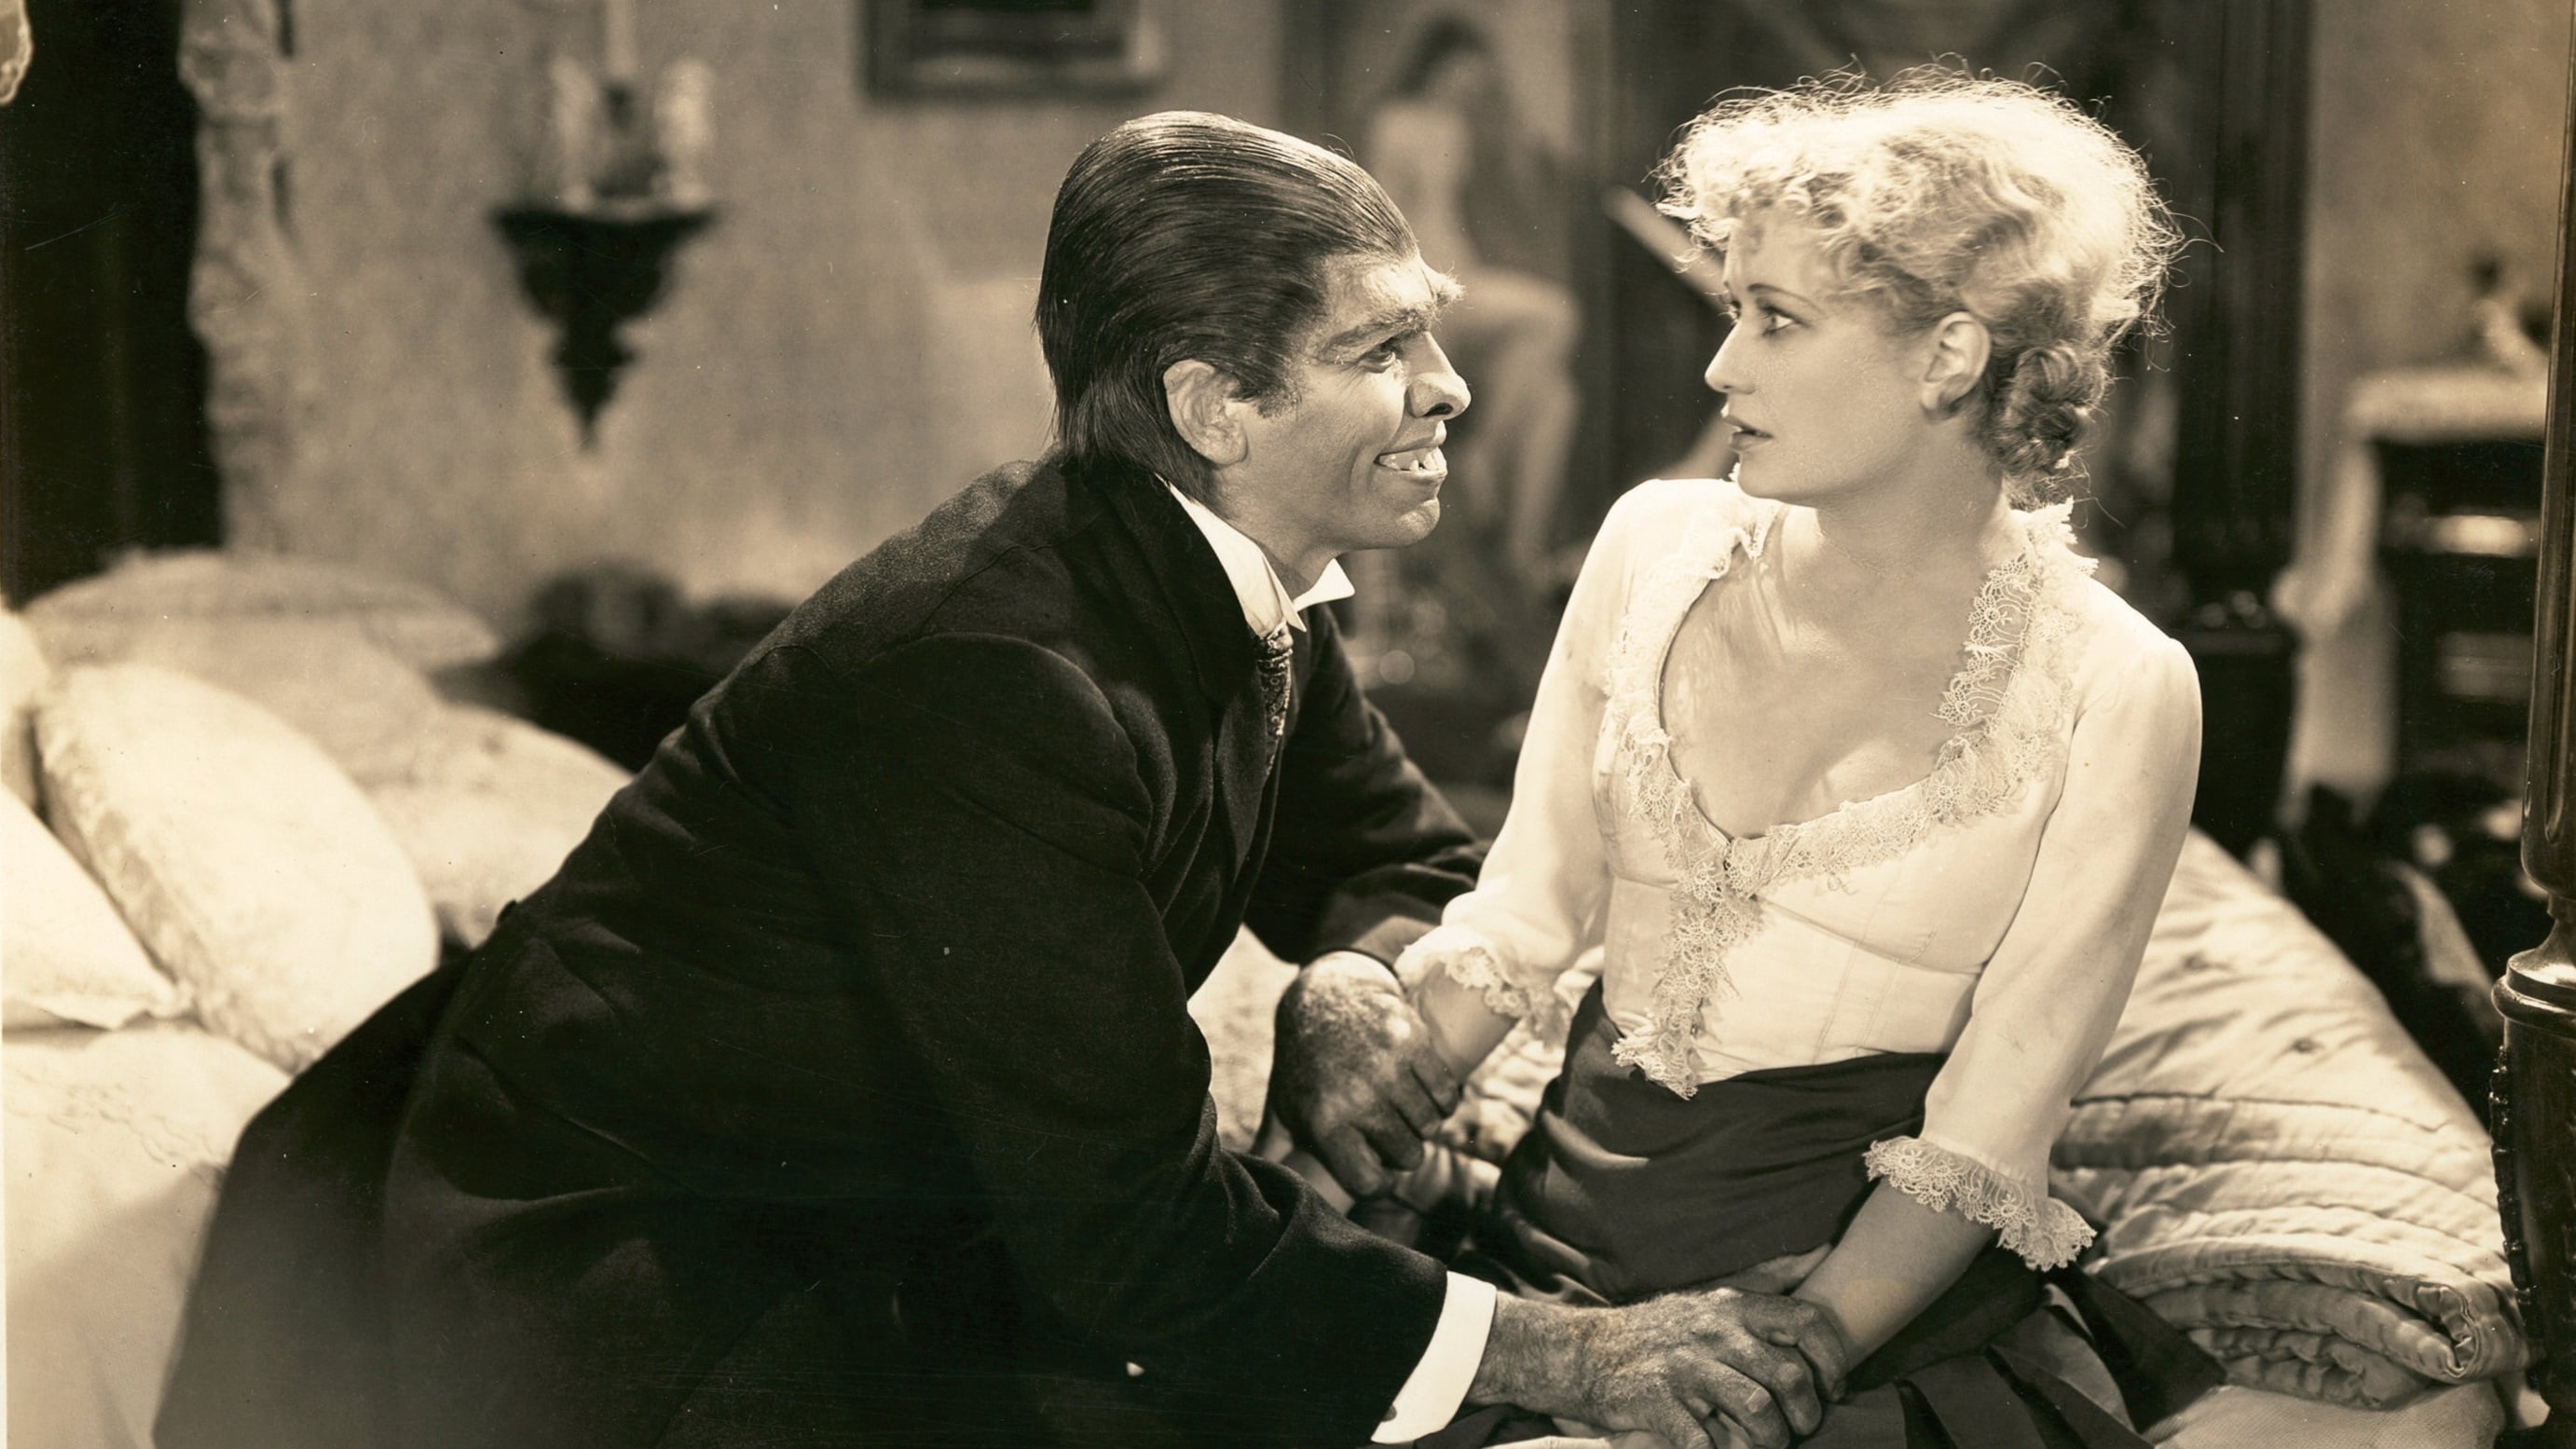 Dr. Jekyll and Mr. Hyde 1931 123movies